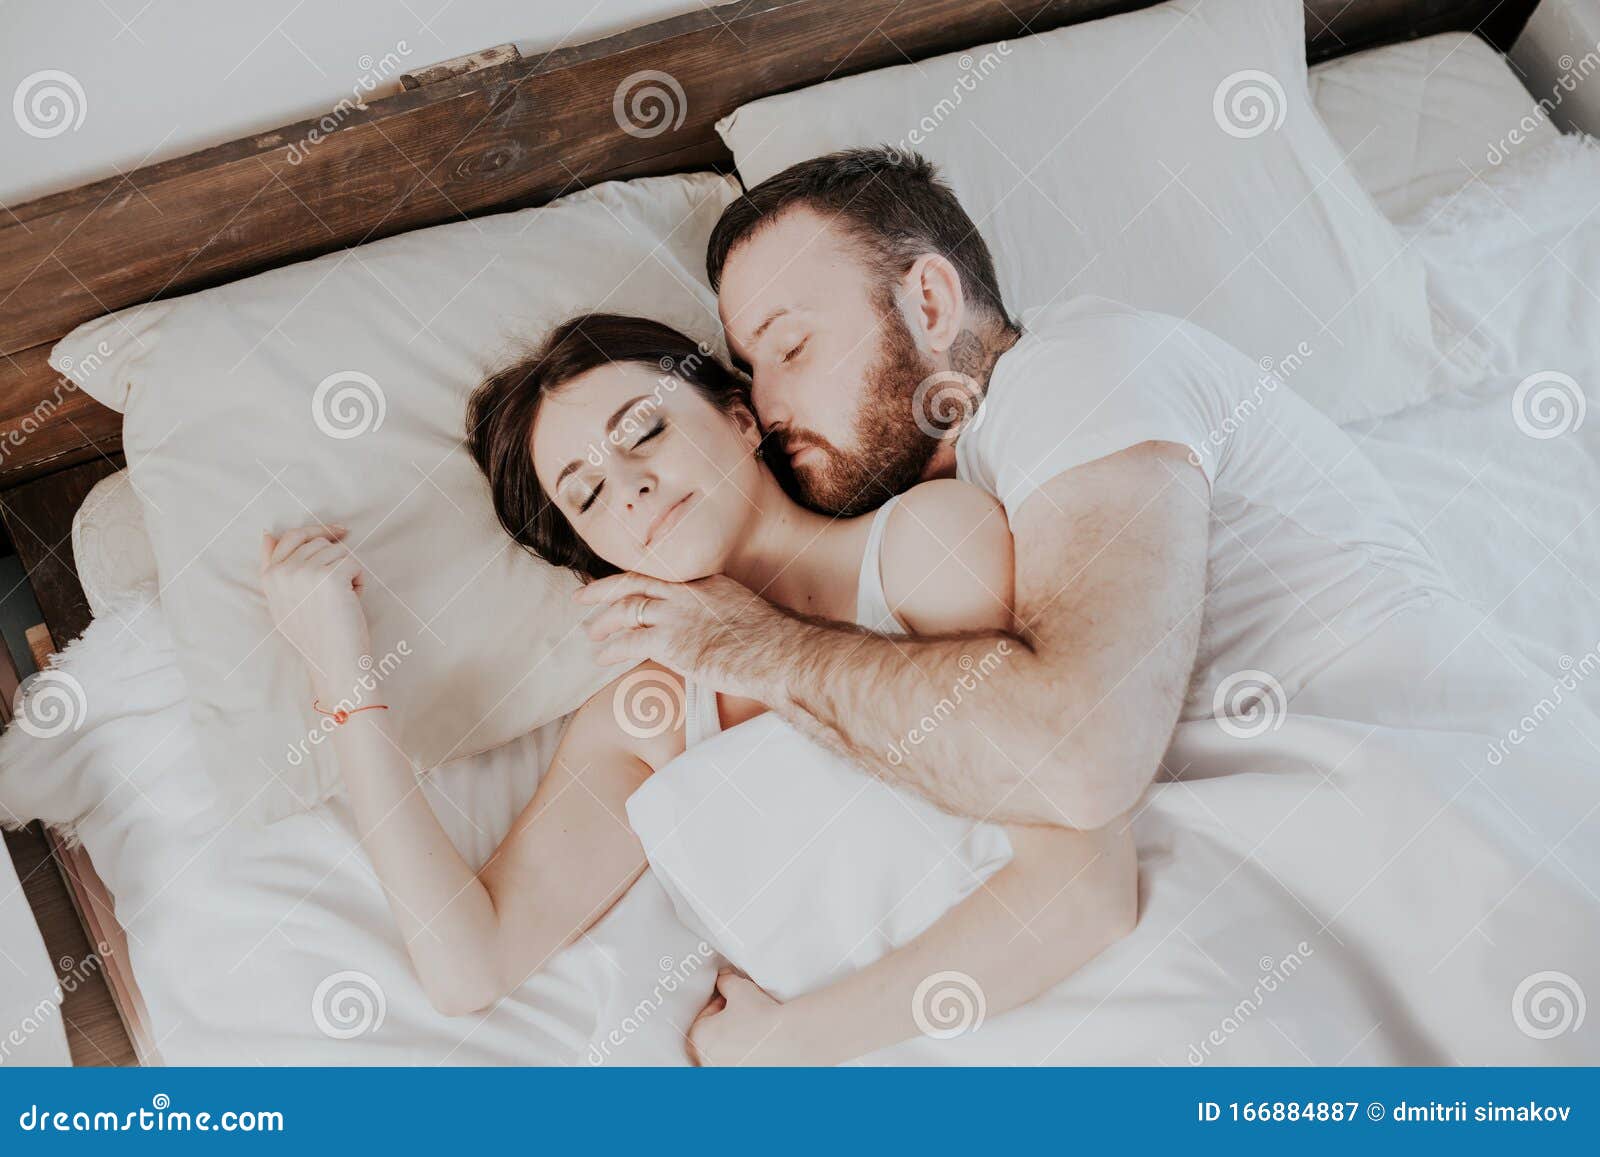 Husband And Wife Wake Up In The Morning In The Bedroom Of The Week